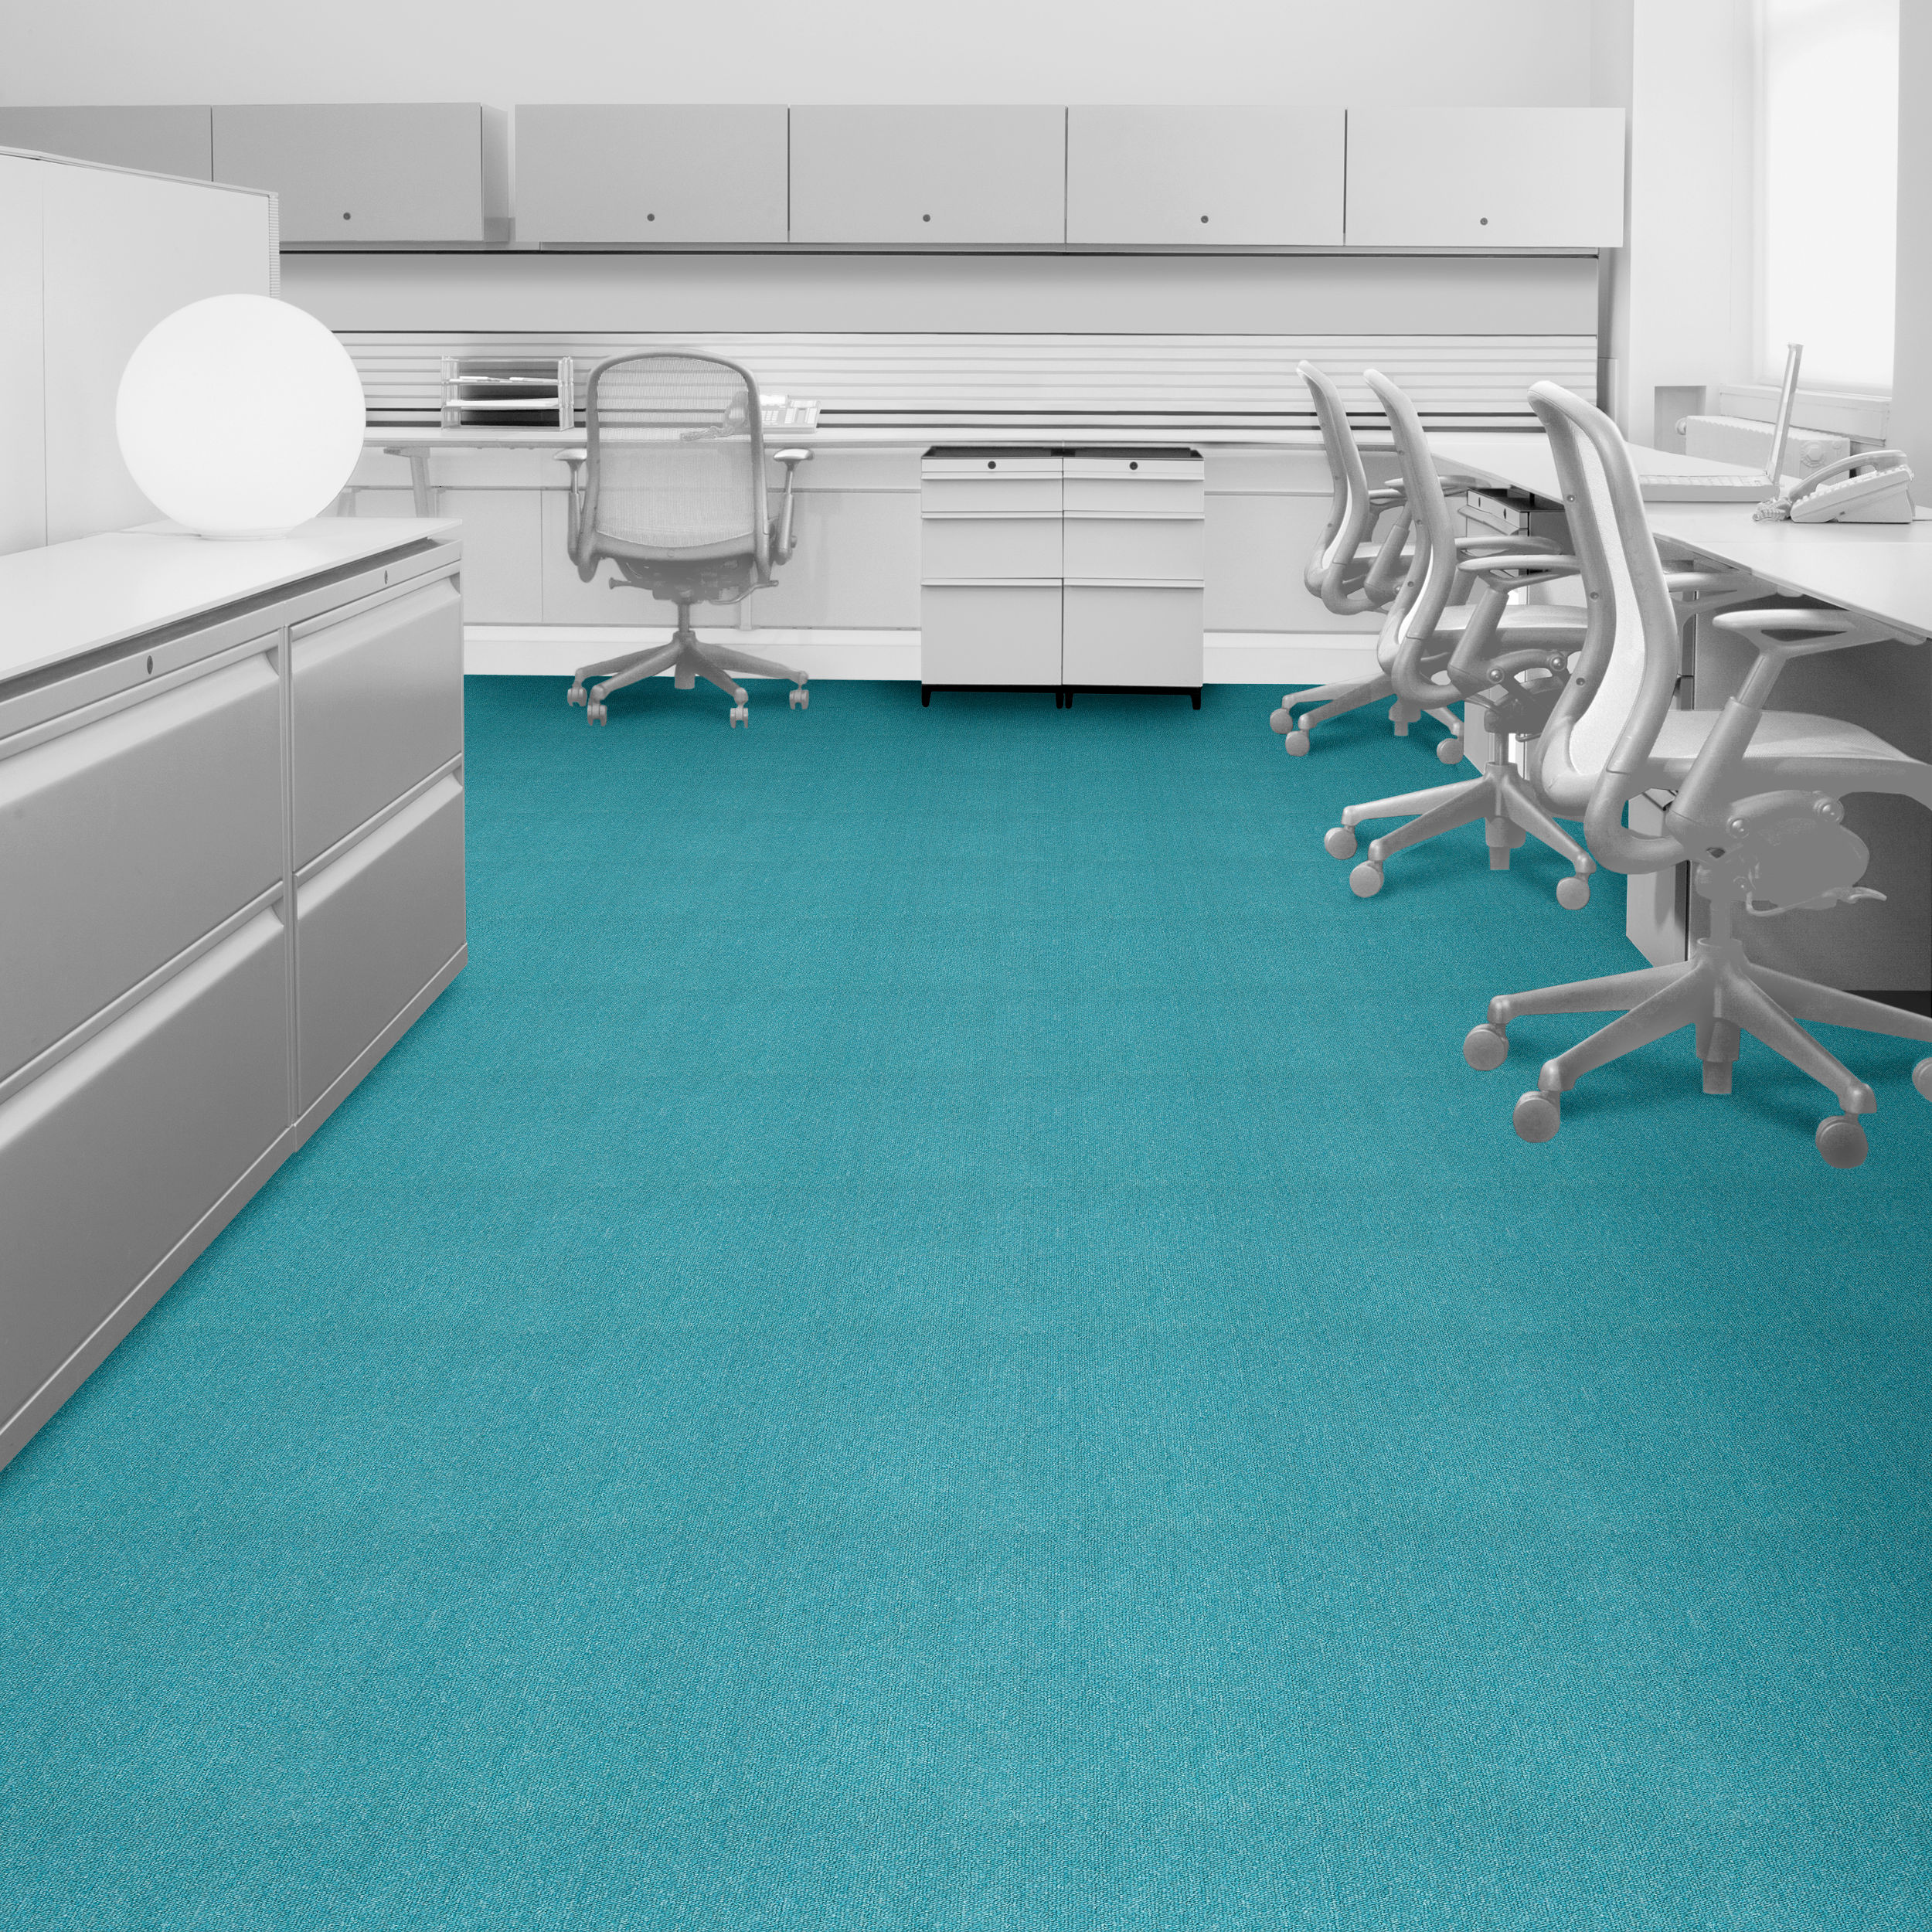 Interface Heuga 580 Carpet Tile - Cuacao variation in office setting.